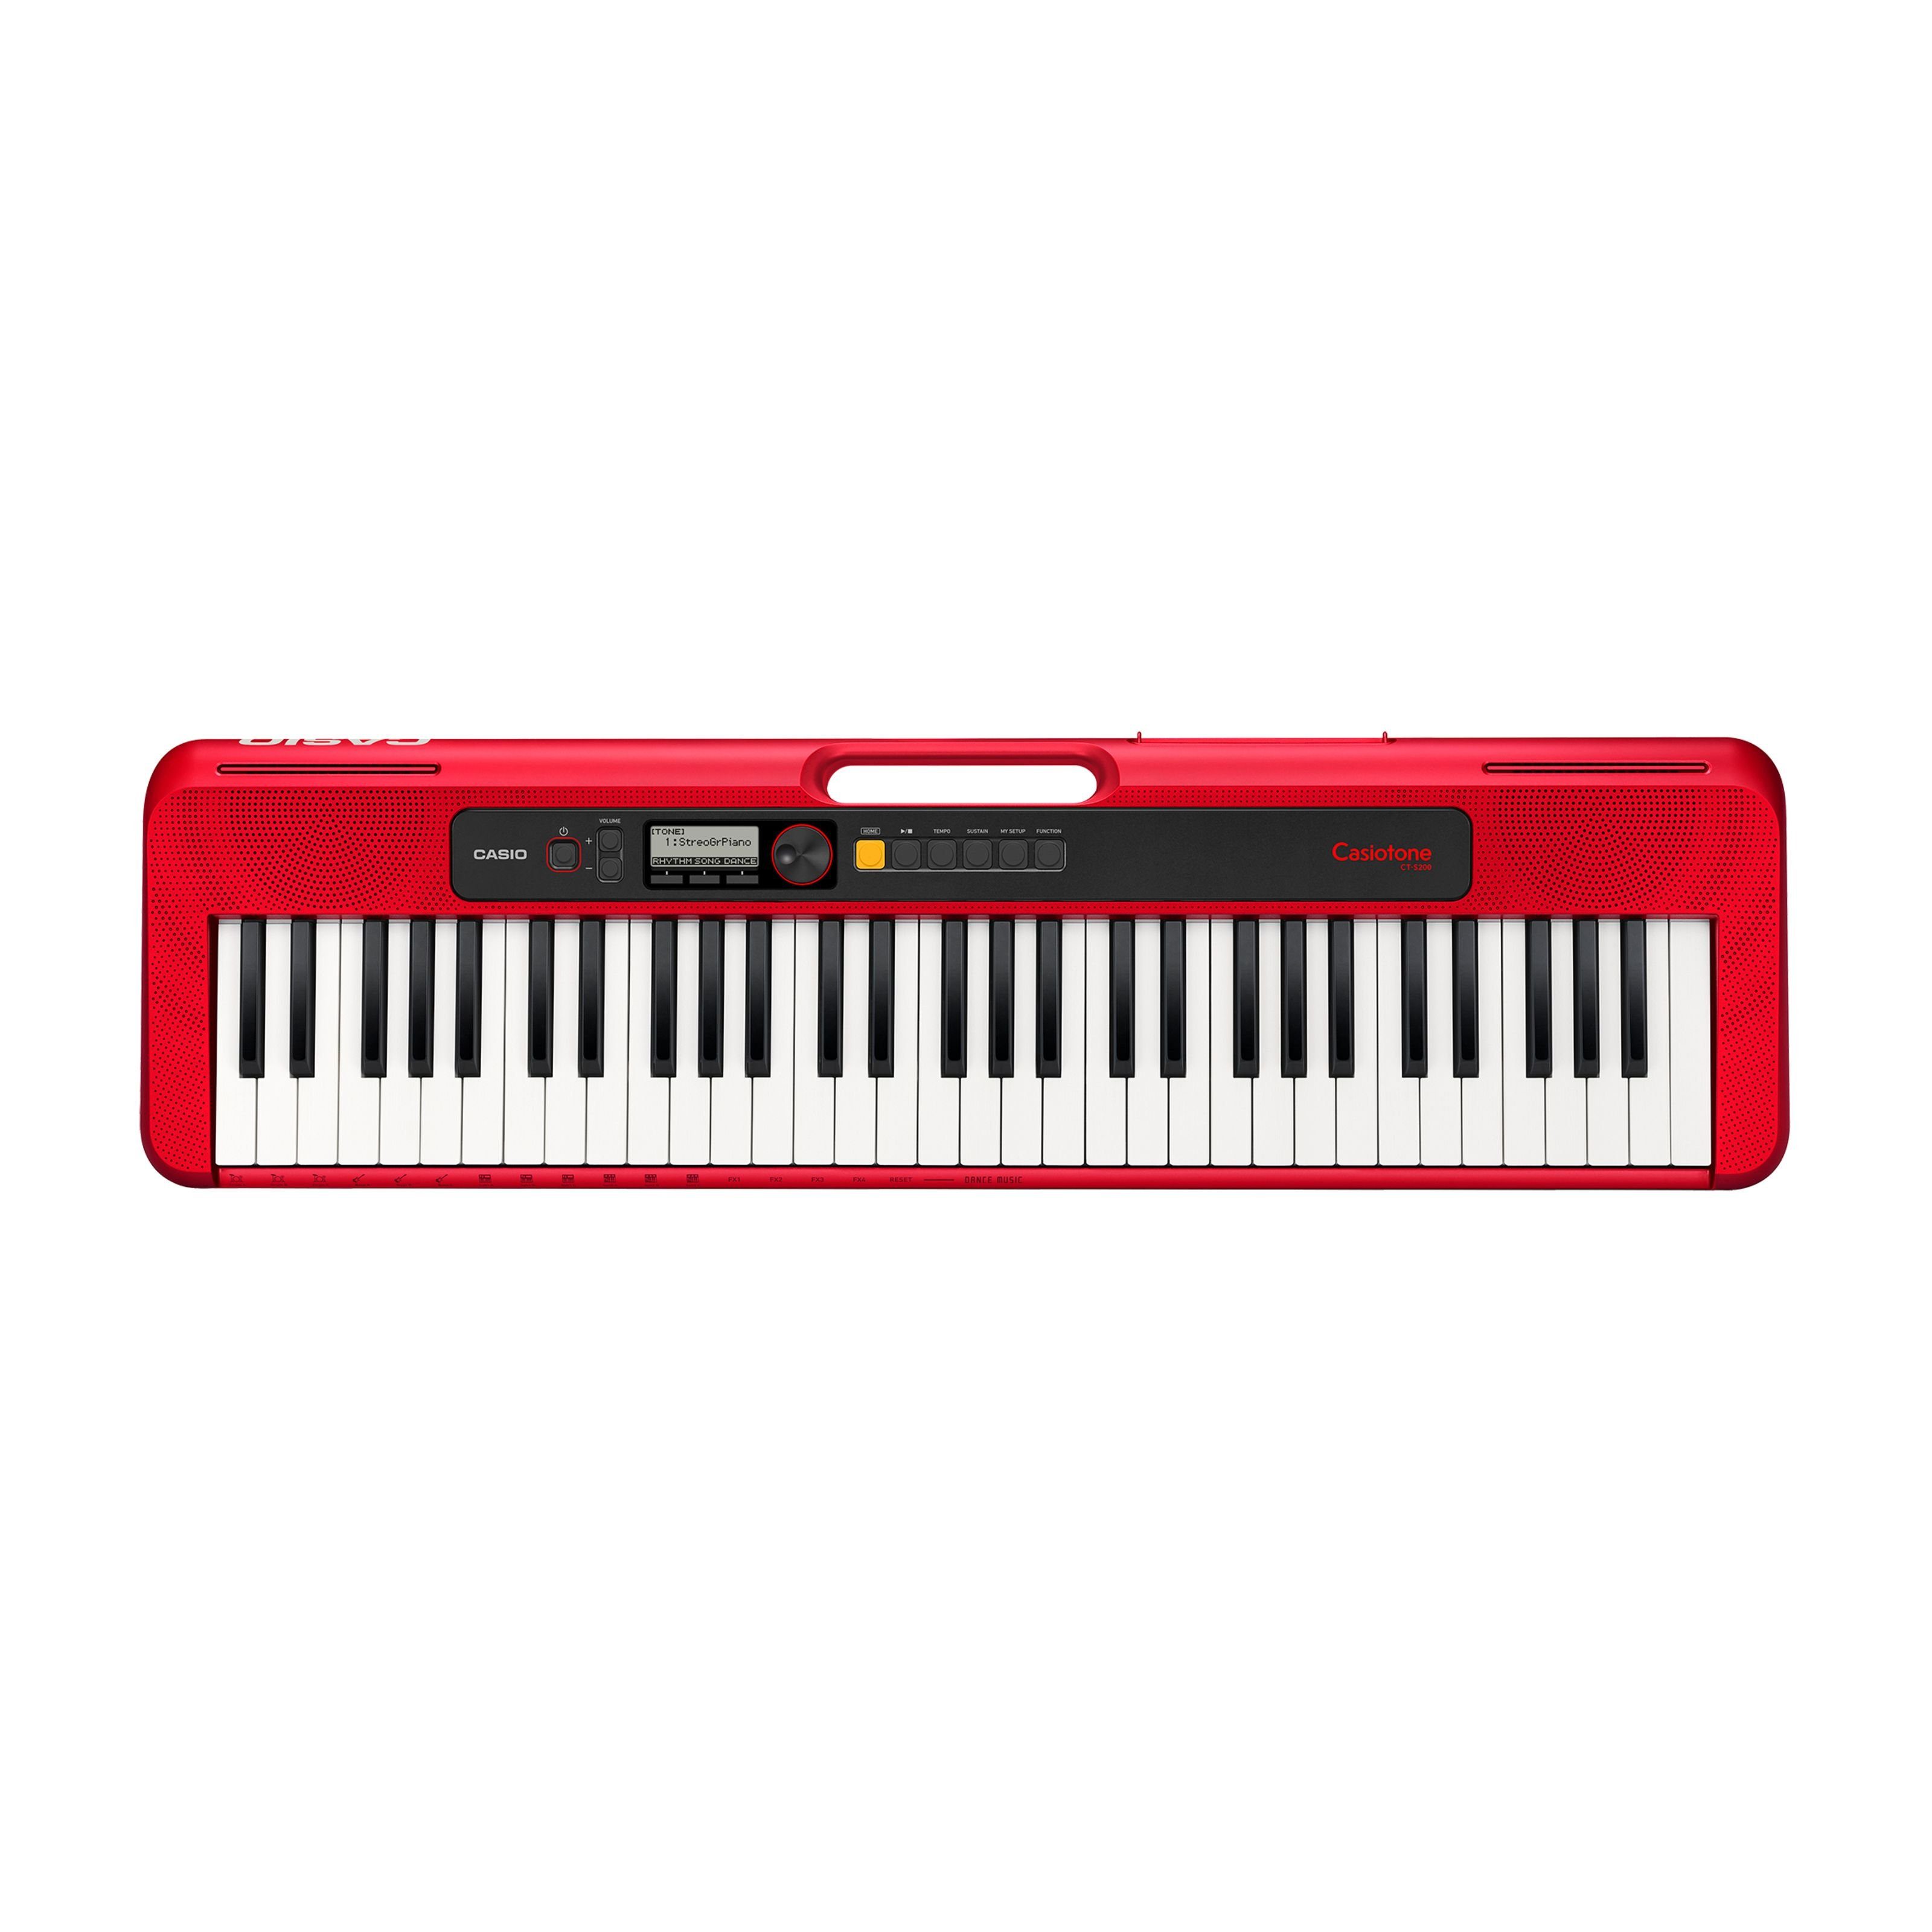 CASIO Home Keyboard, CT-S200 RD